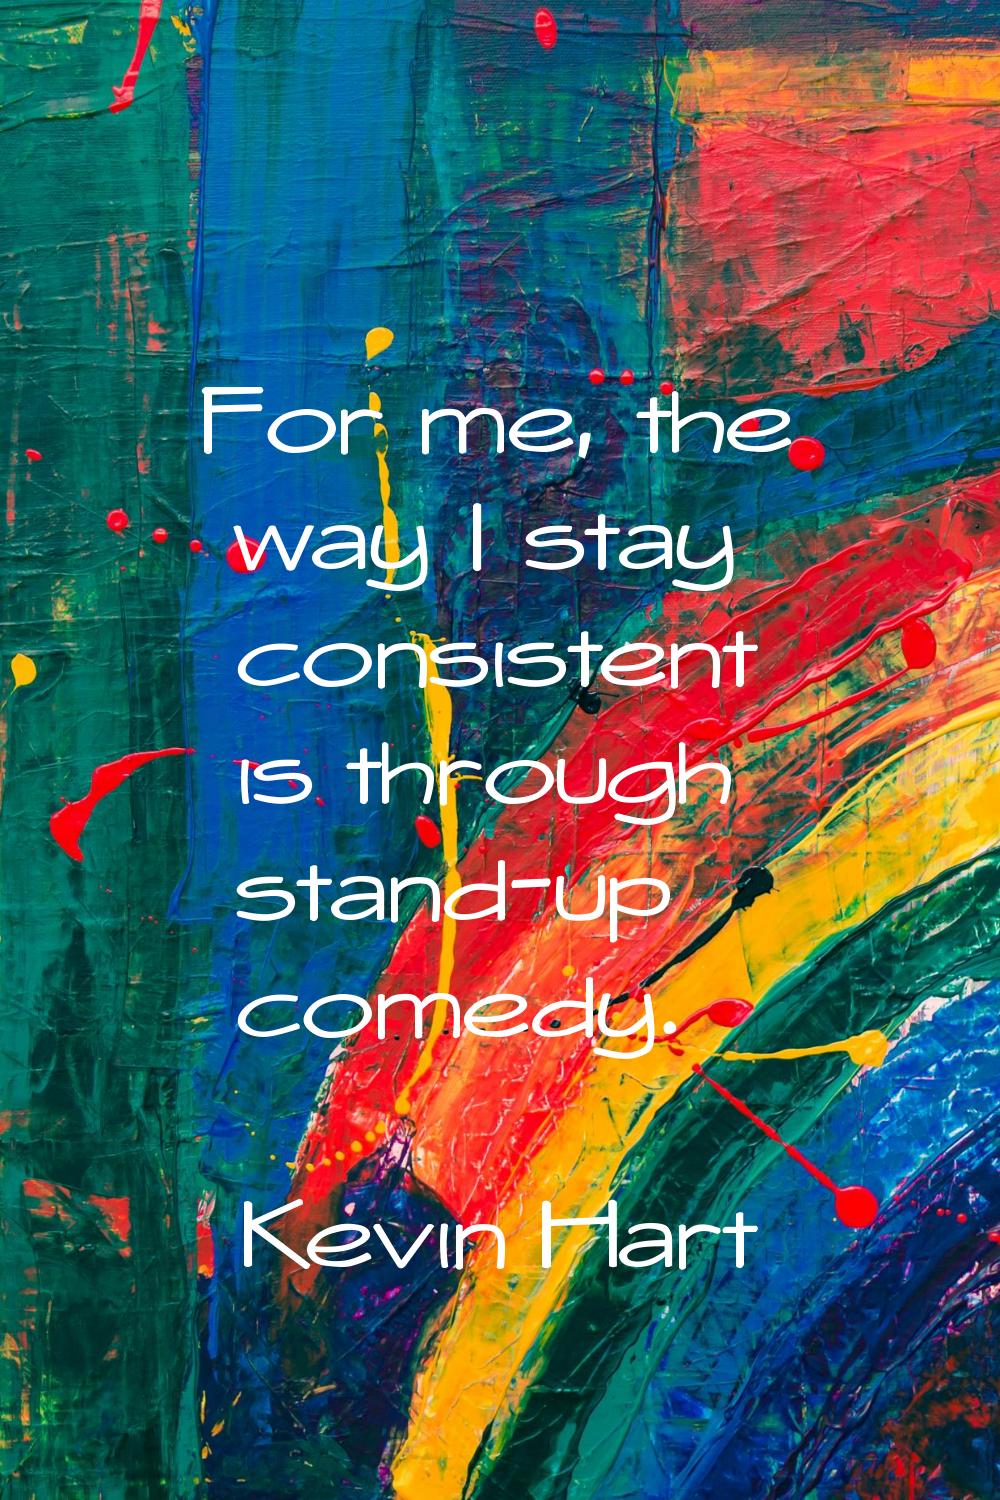 For me, the way I stay consistent is through stand-up comedy.